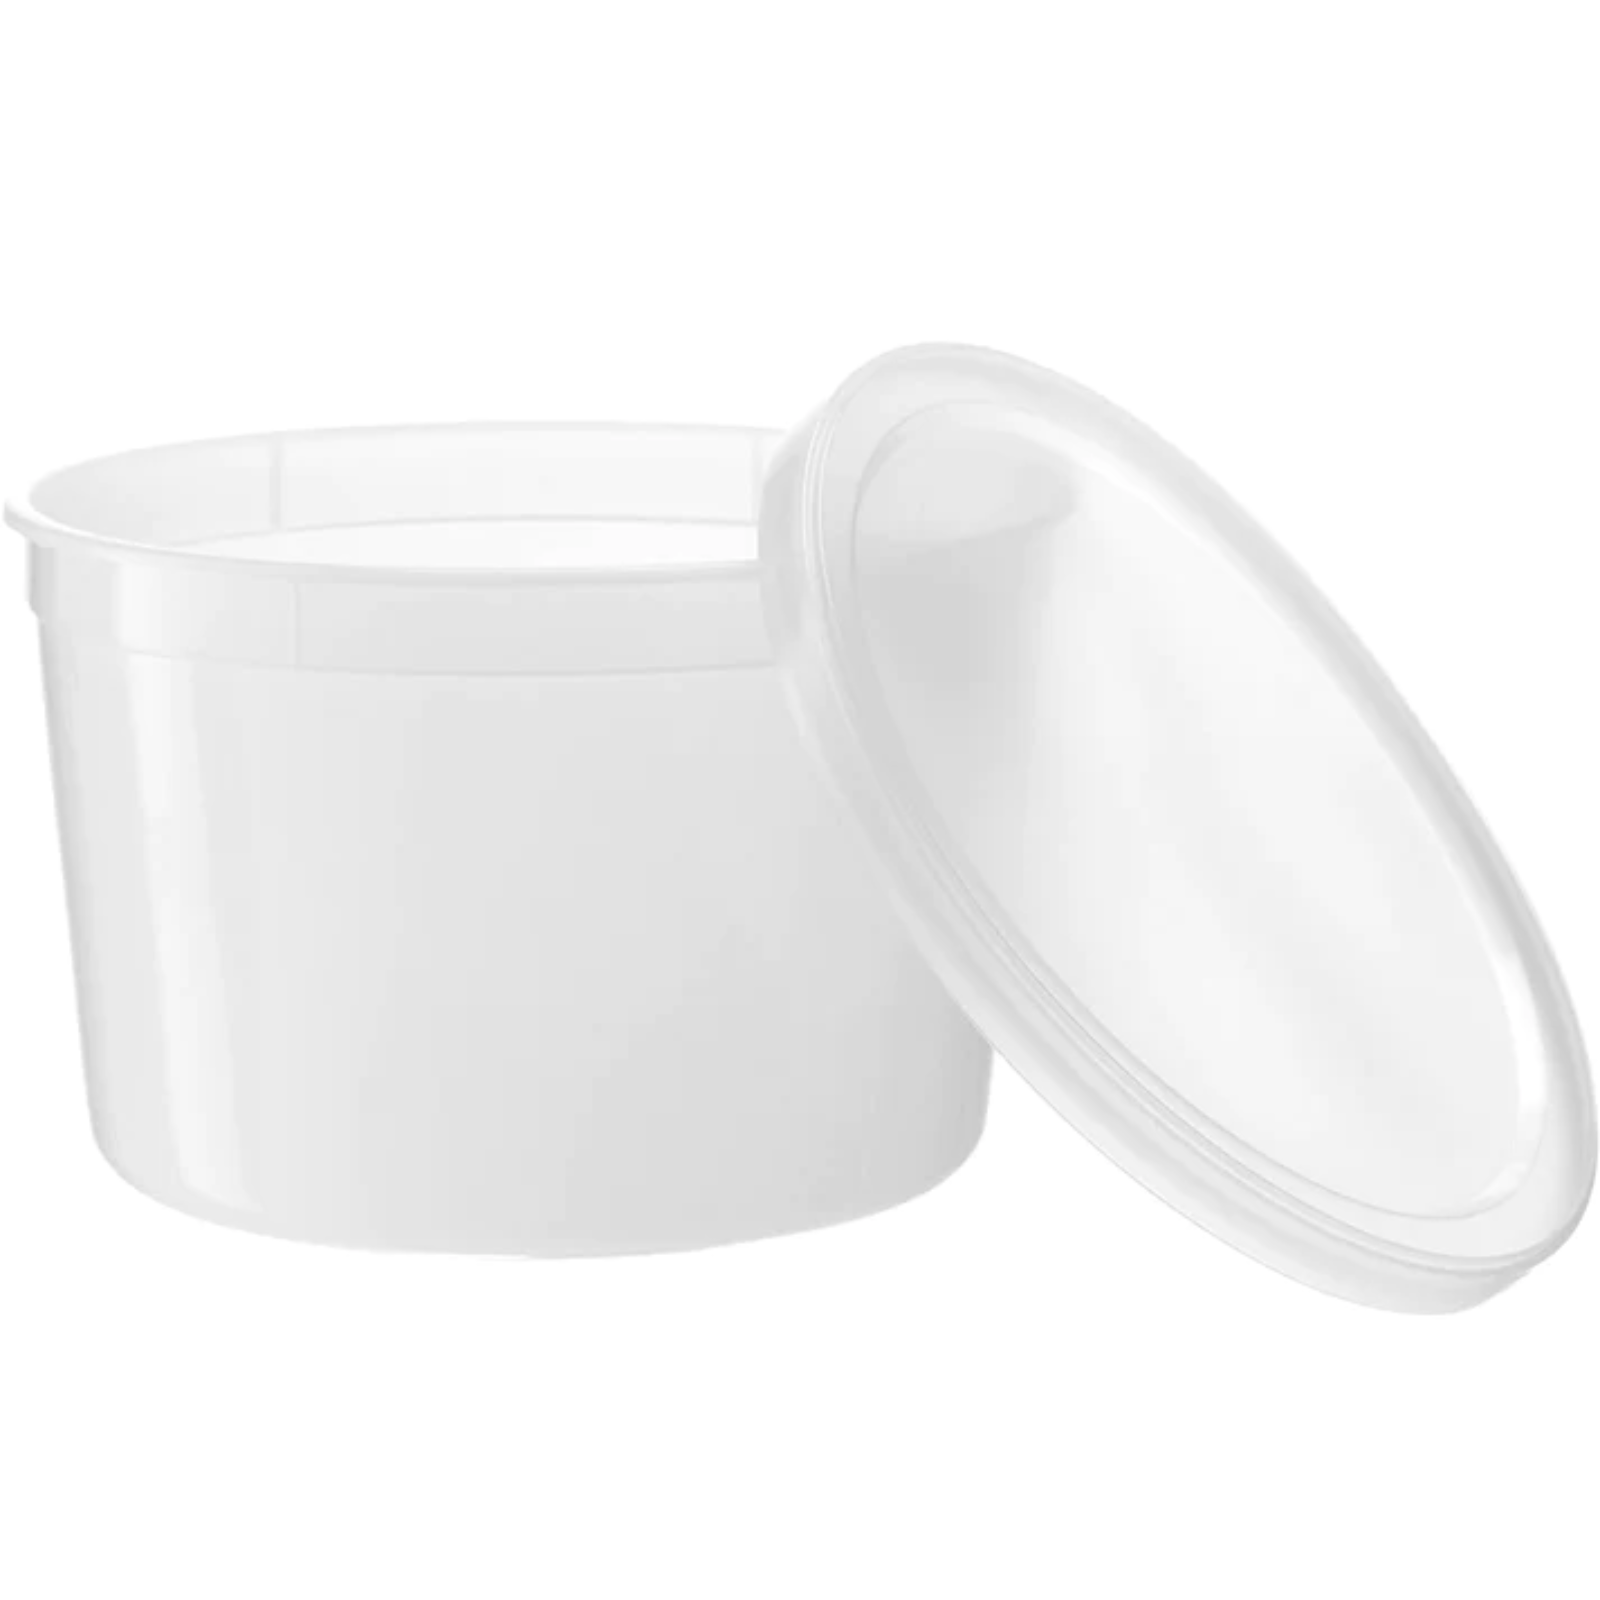 64oz Extra Strong Quality Heavyweight Deli Container with Lids Food Storage & Serving VeZee   